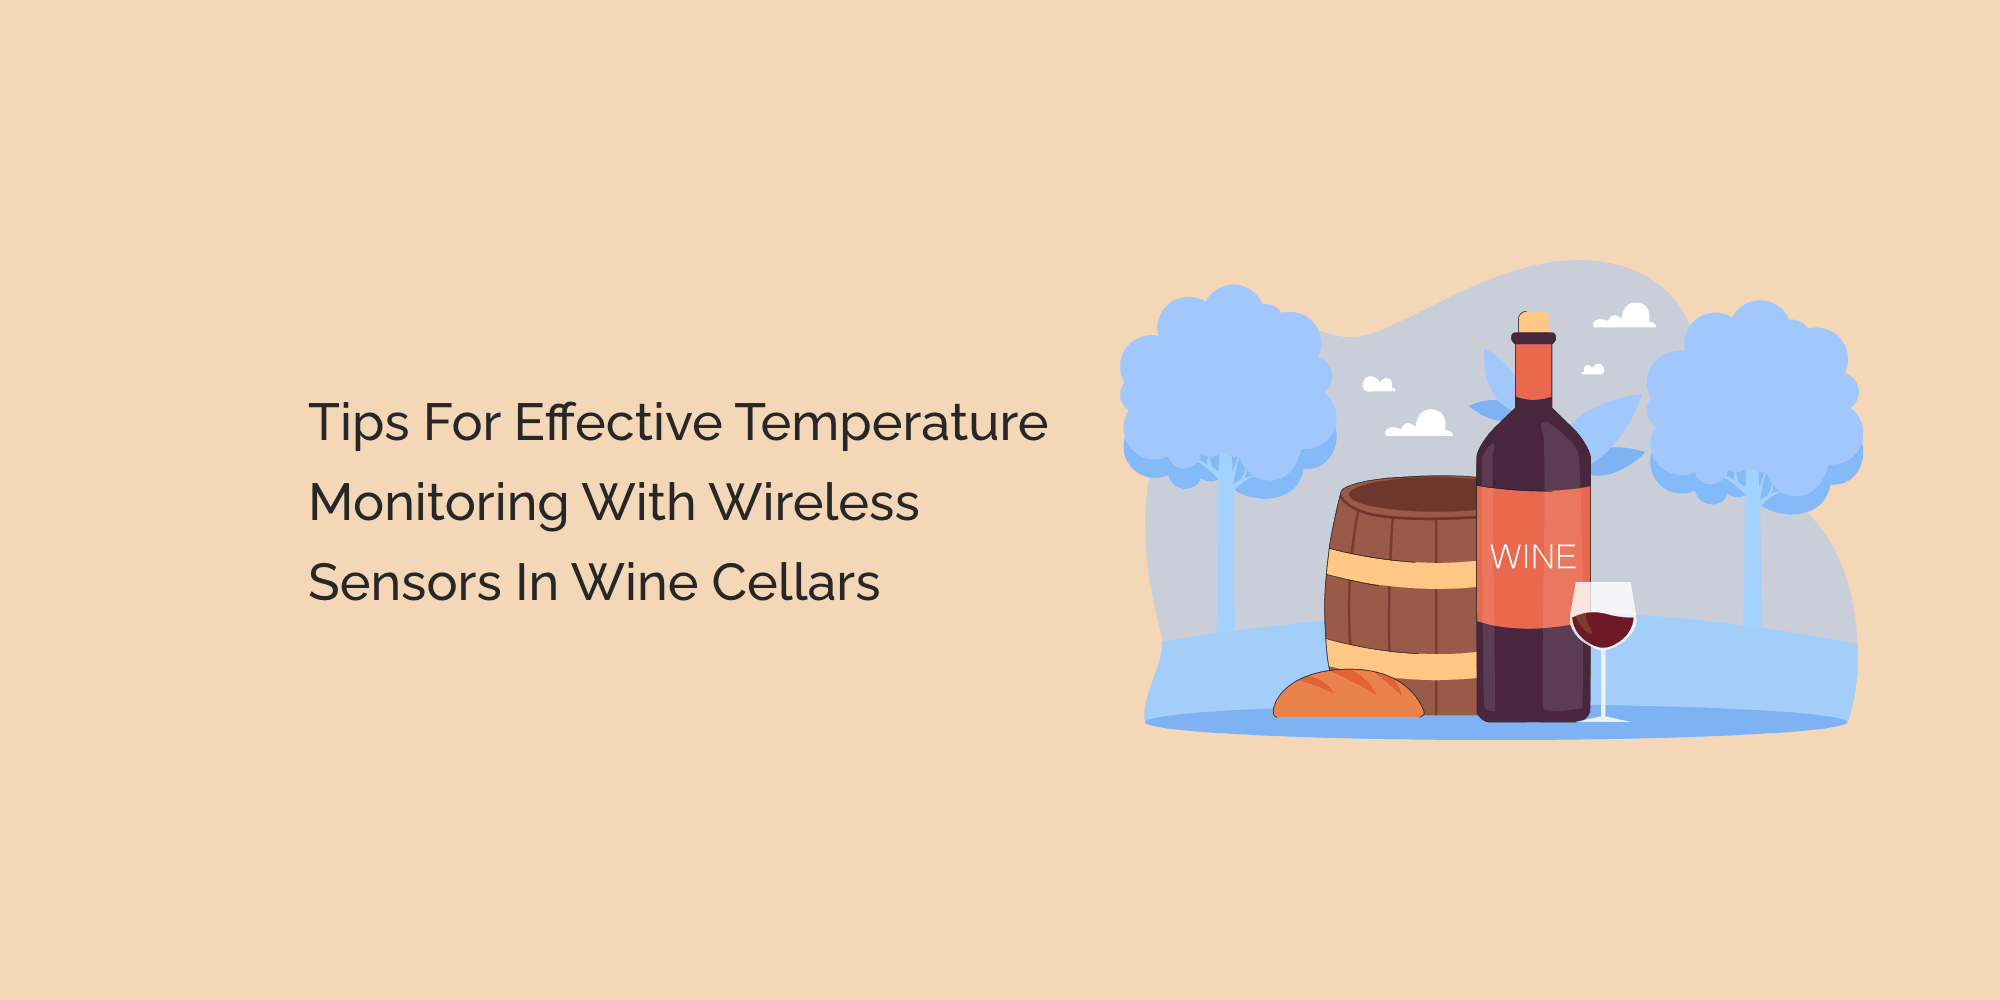 Tips for effective temperature monitoring with wireless sensors in Wine cellars